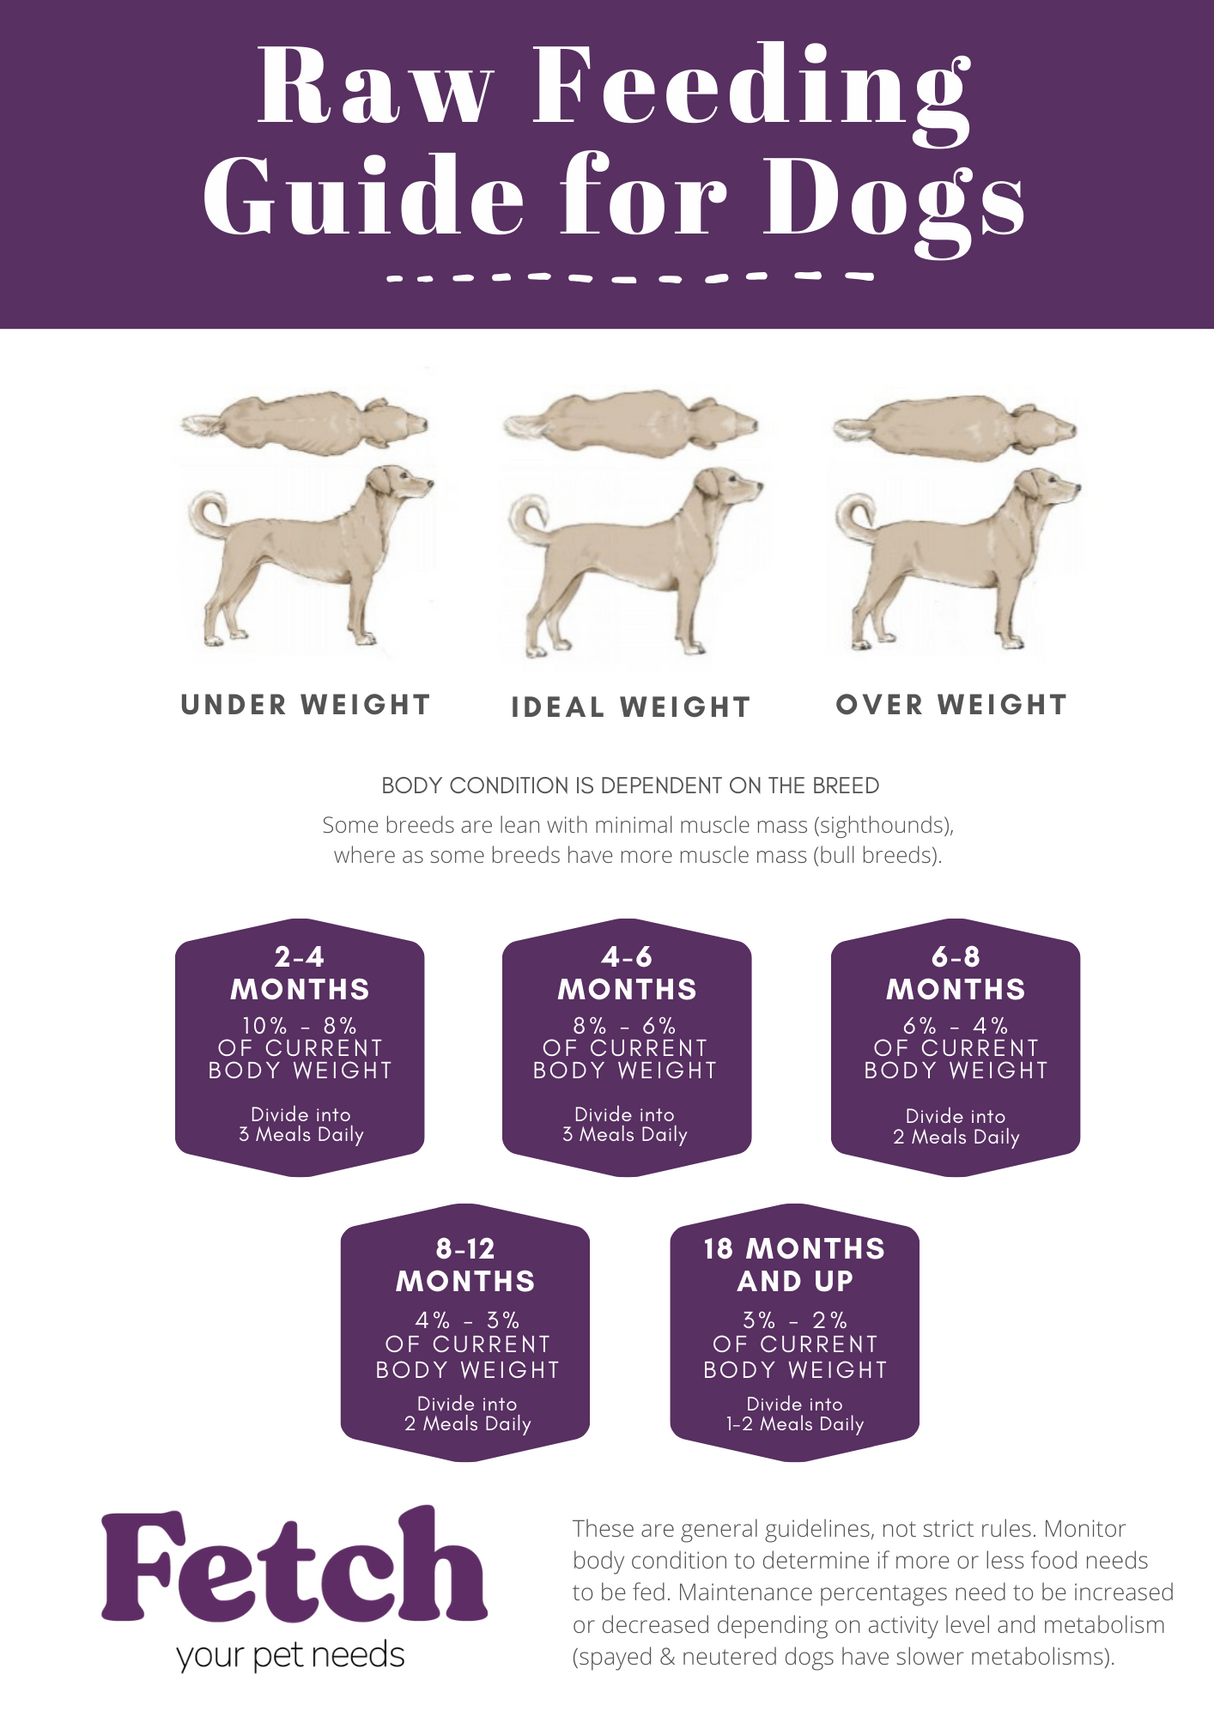 Raw Feeding Guide for Dogs from Fetch Your Pet Needs